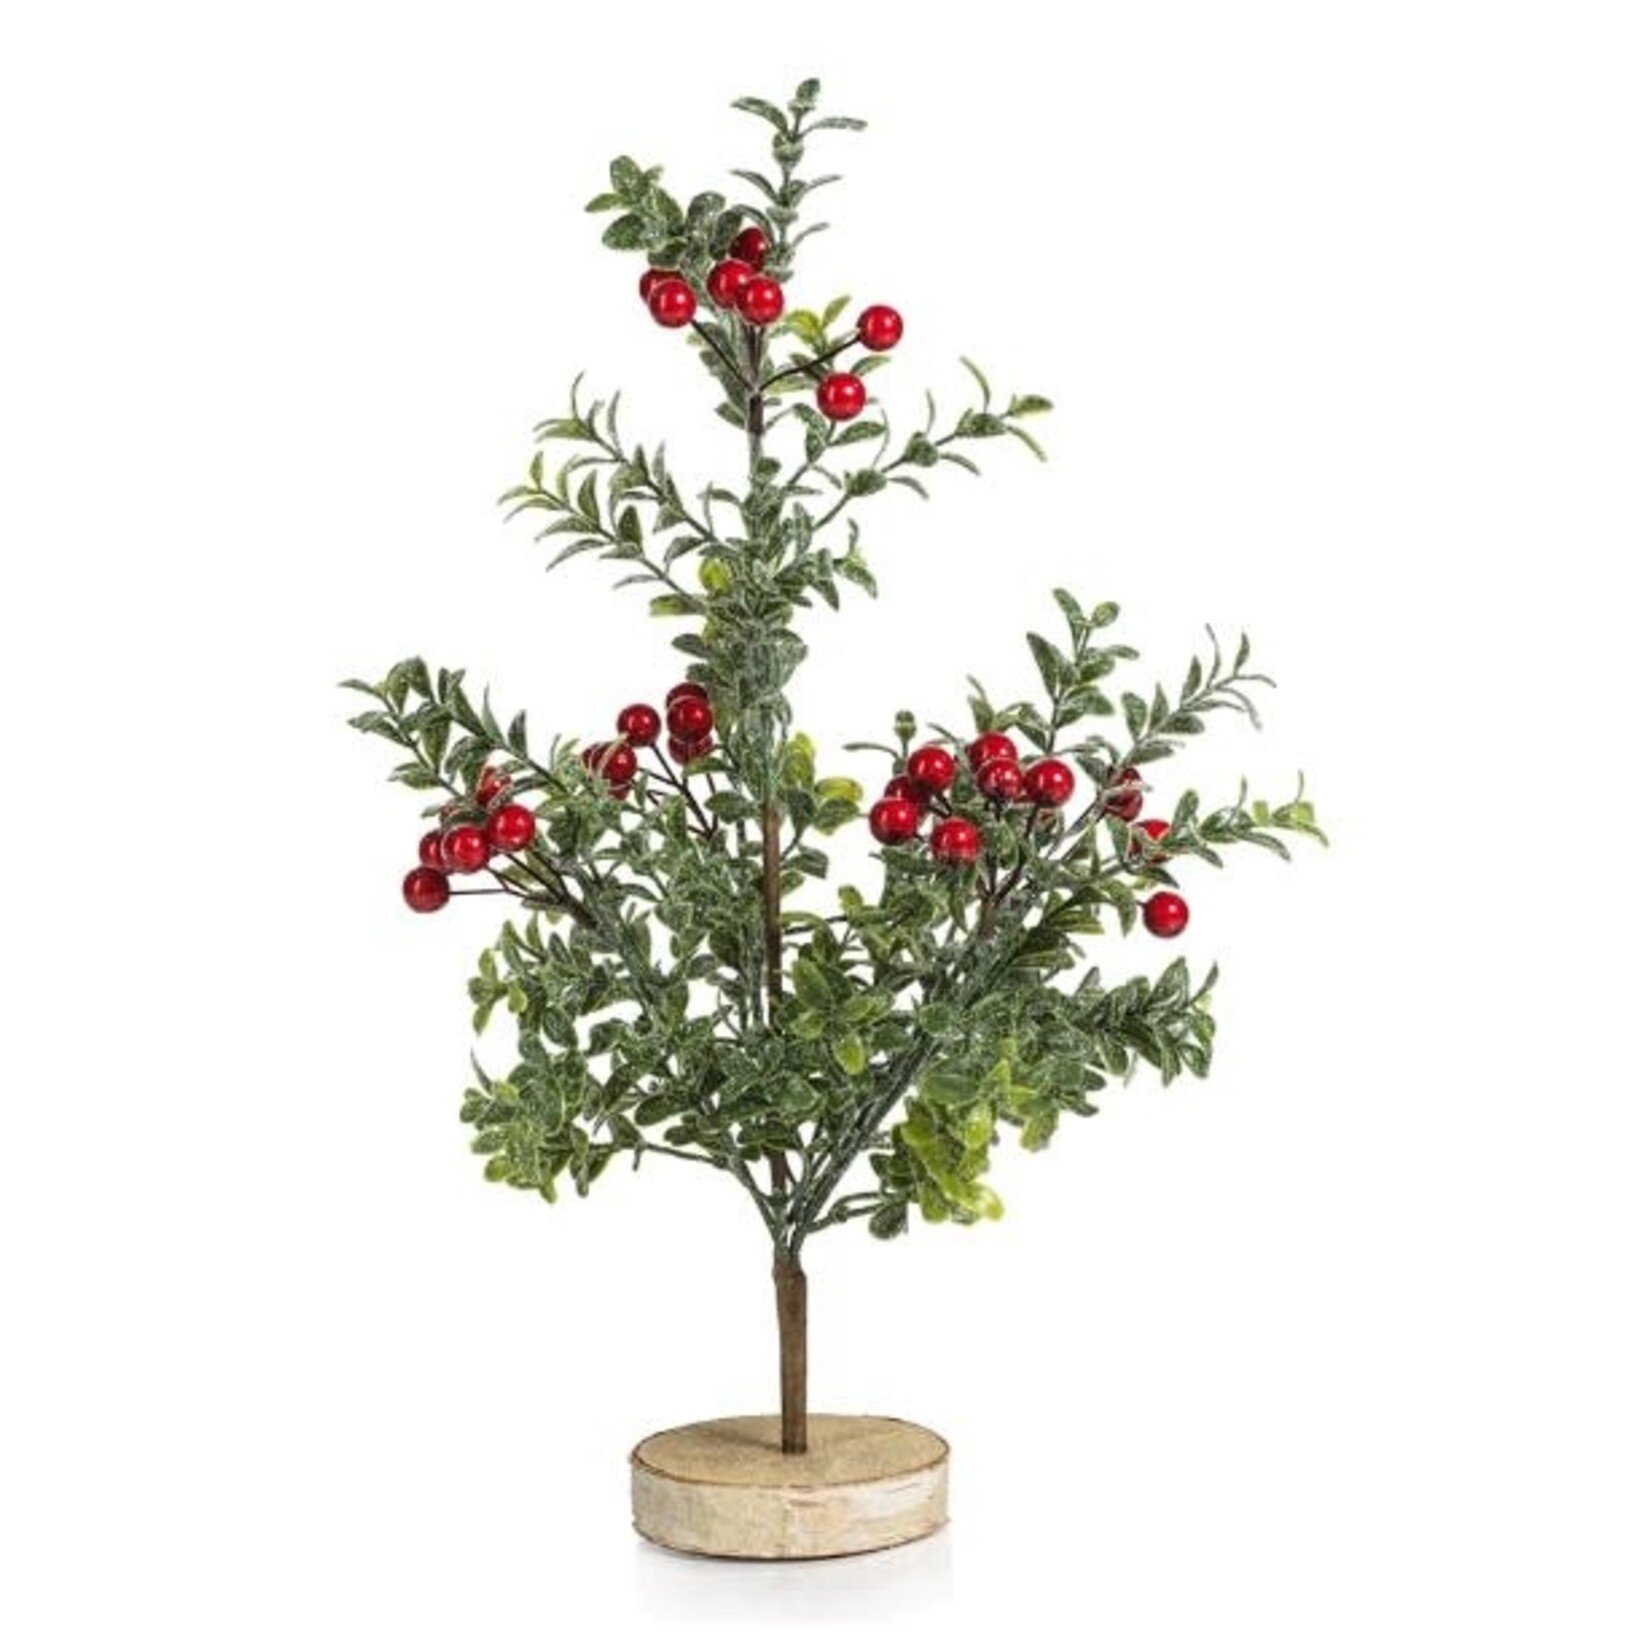 Zodax Tree with Red Holly Berries 14 in